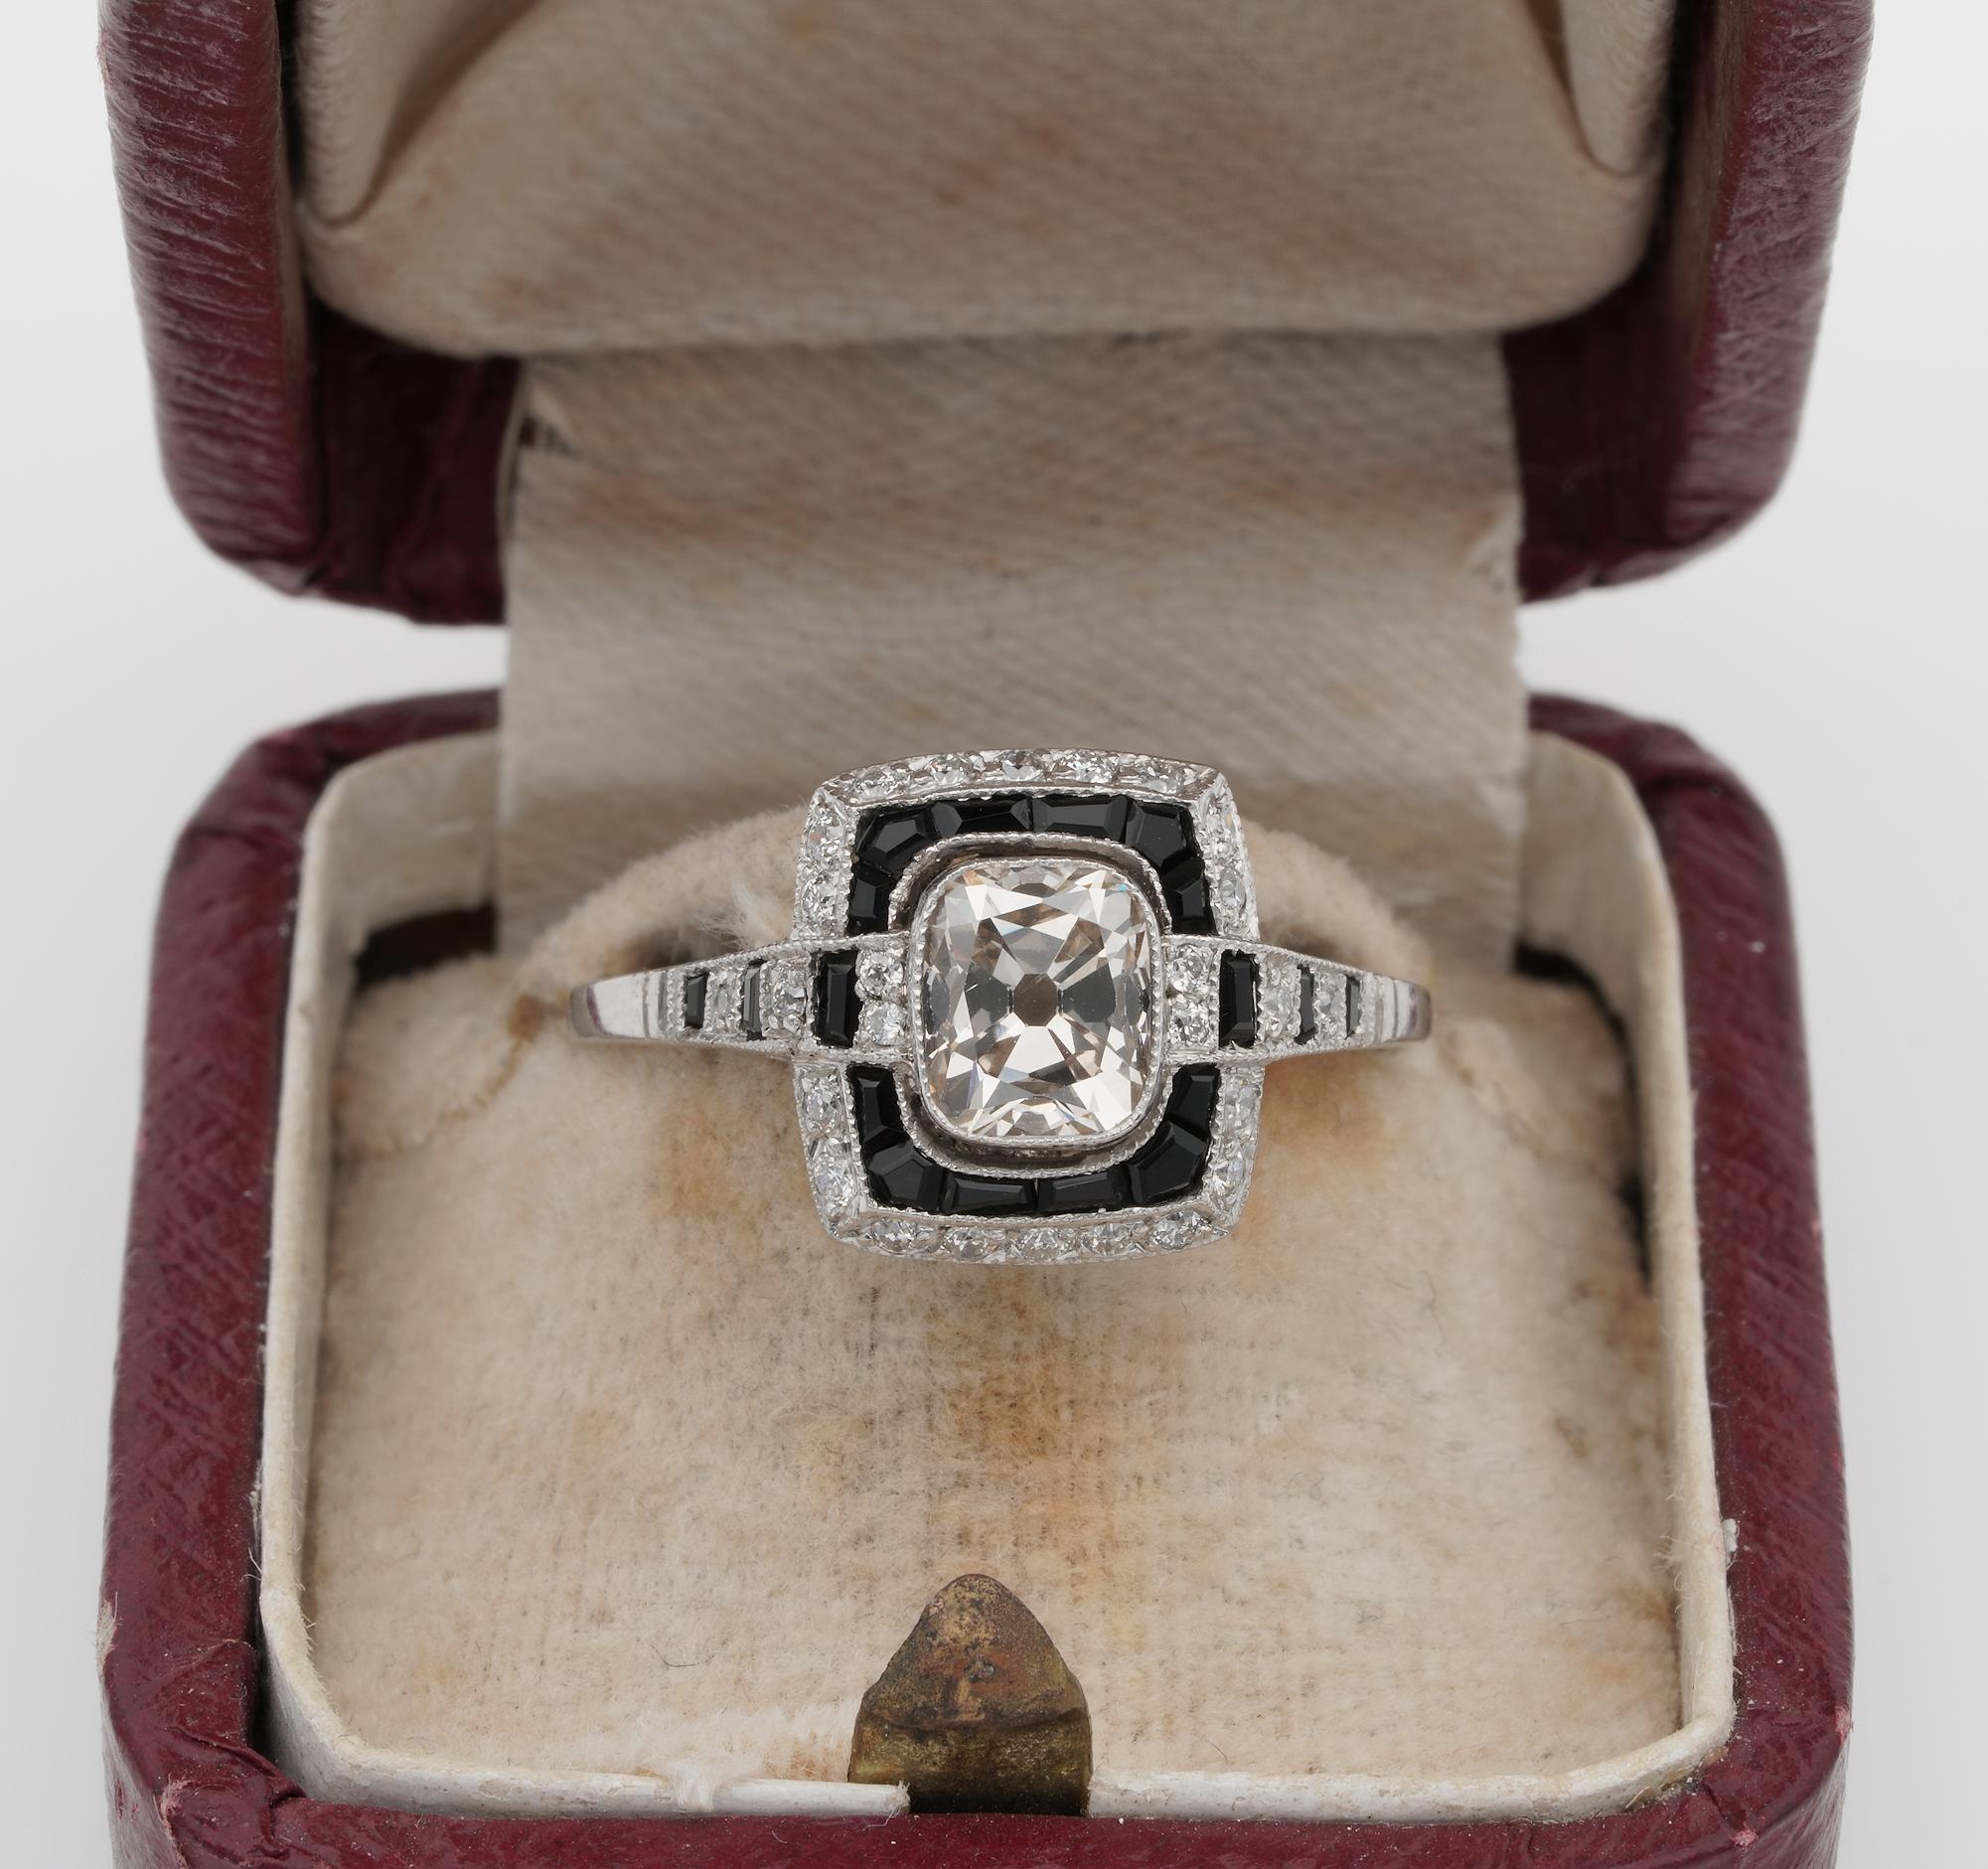 Spotlight on Personality

Sought after today as it was in the 20's /30's Art Deco jewellery possess distinctive design and quality workmanship
This striking Art Deco engagement ring has been artful crafted of solid platinum
Amazing geometric pattern